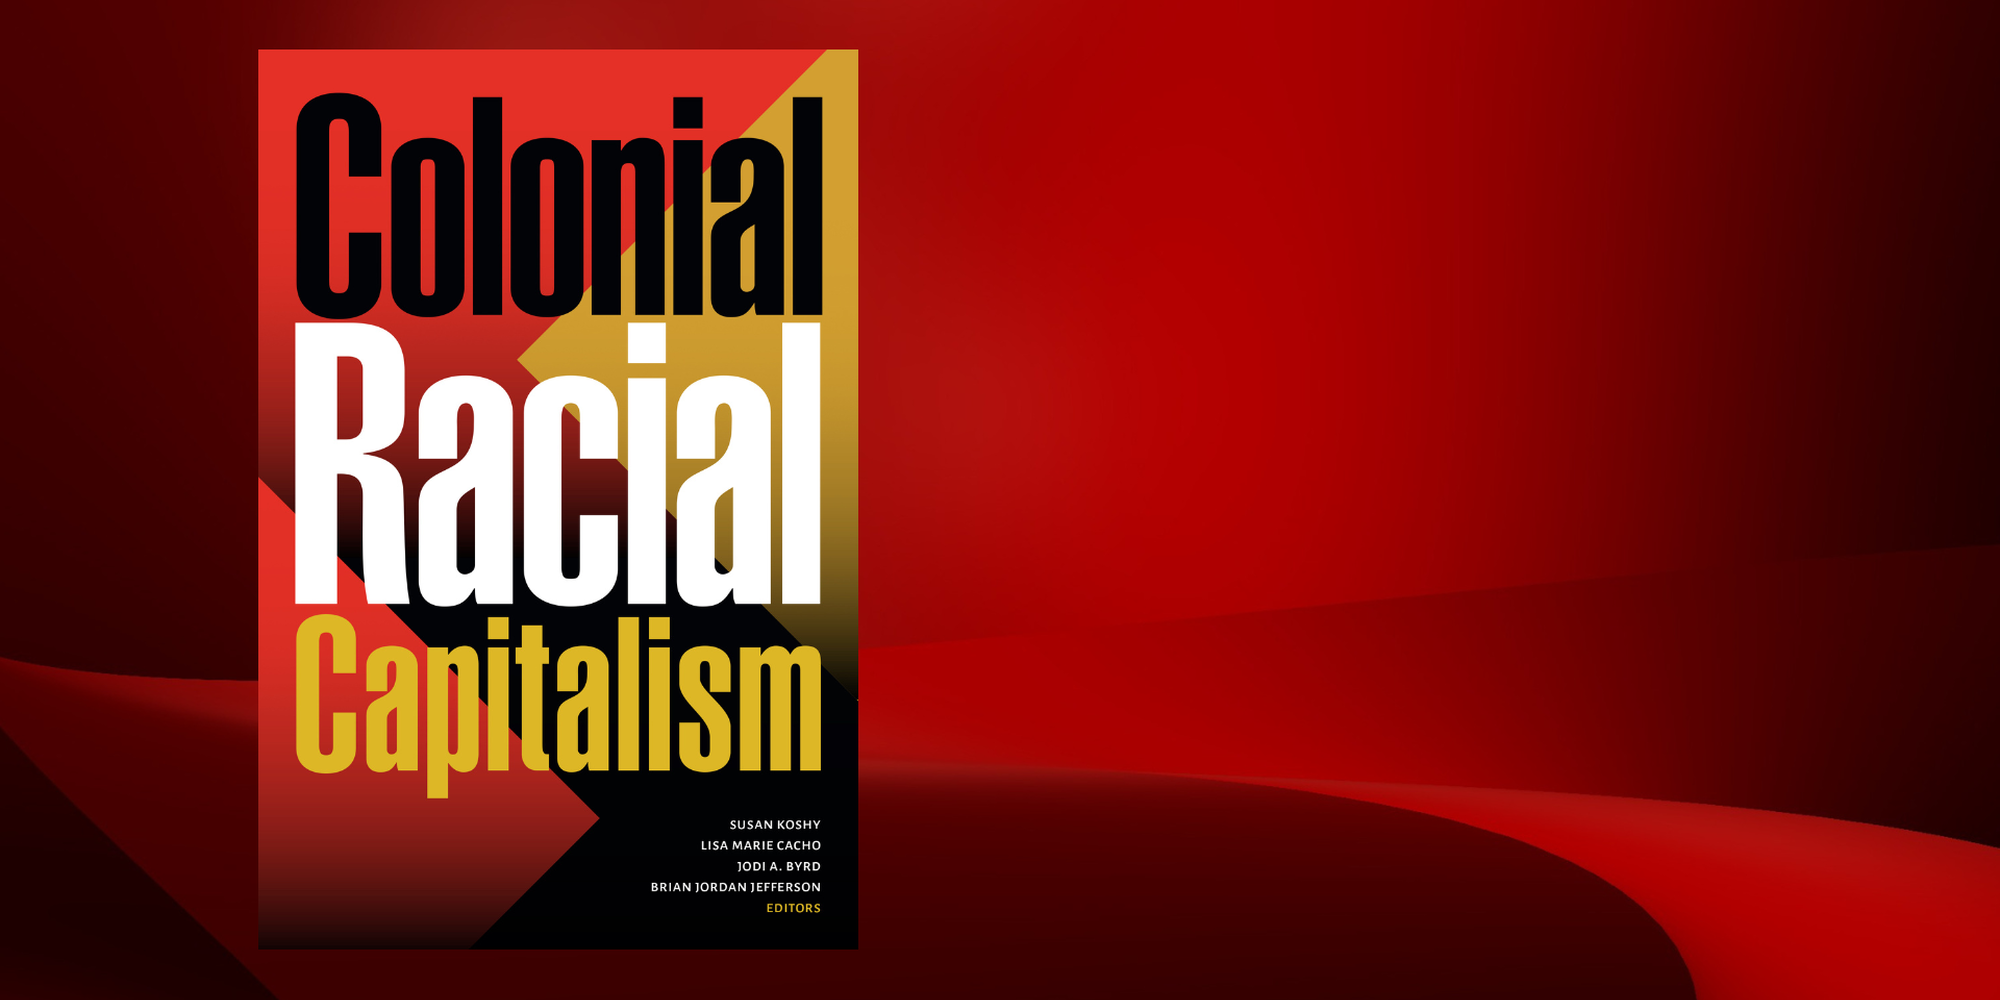 Red and black background with the cover of Colonial Racial Capitalism, the most recent publication from the Unit